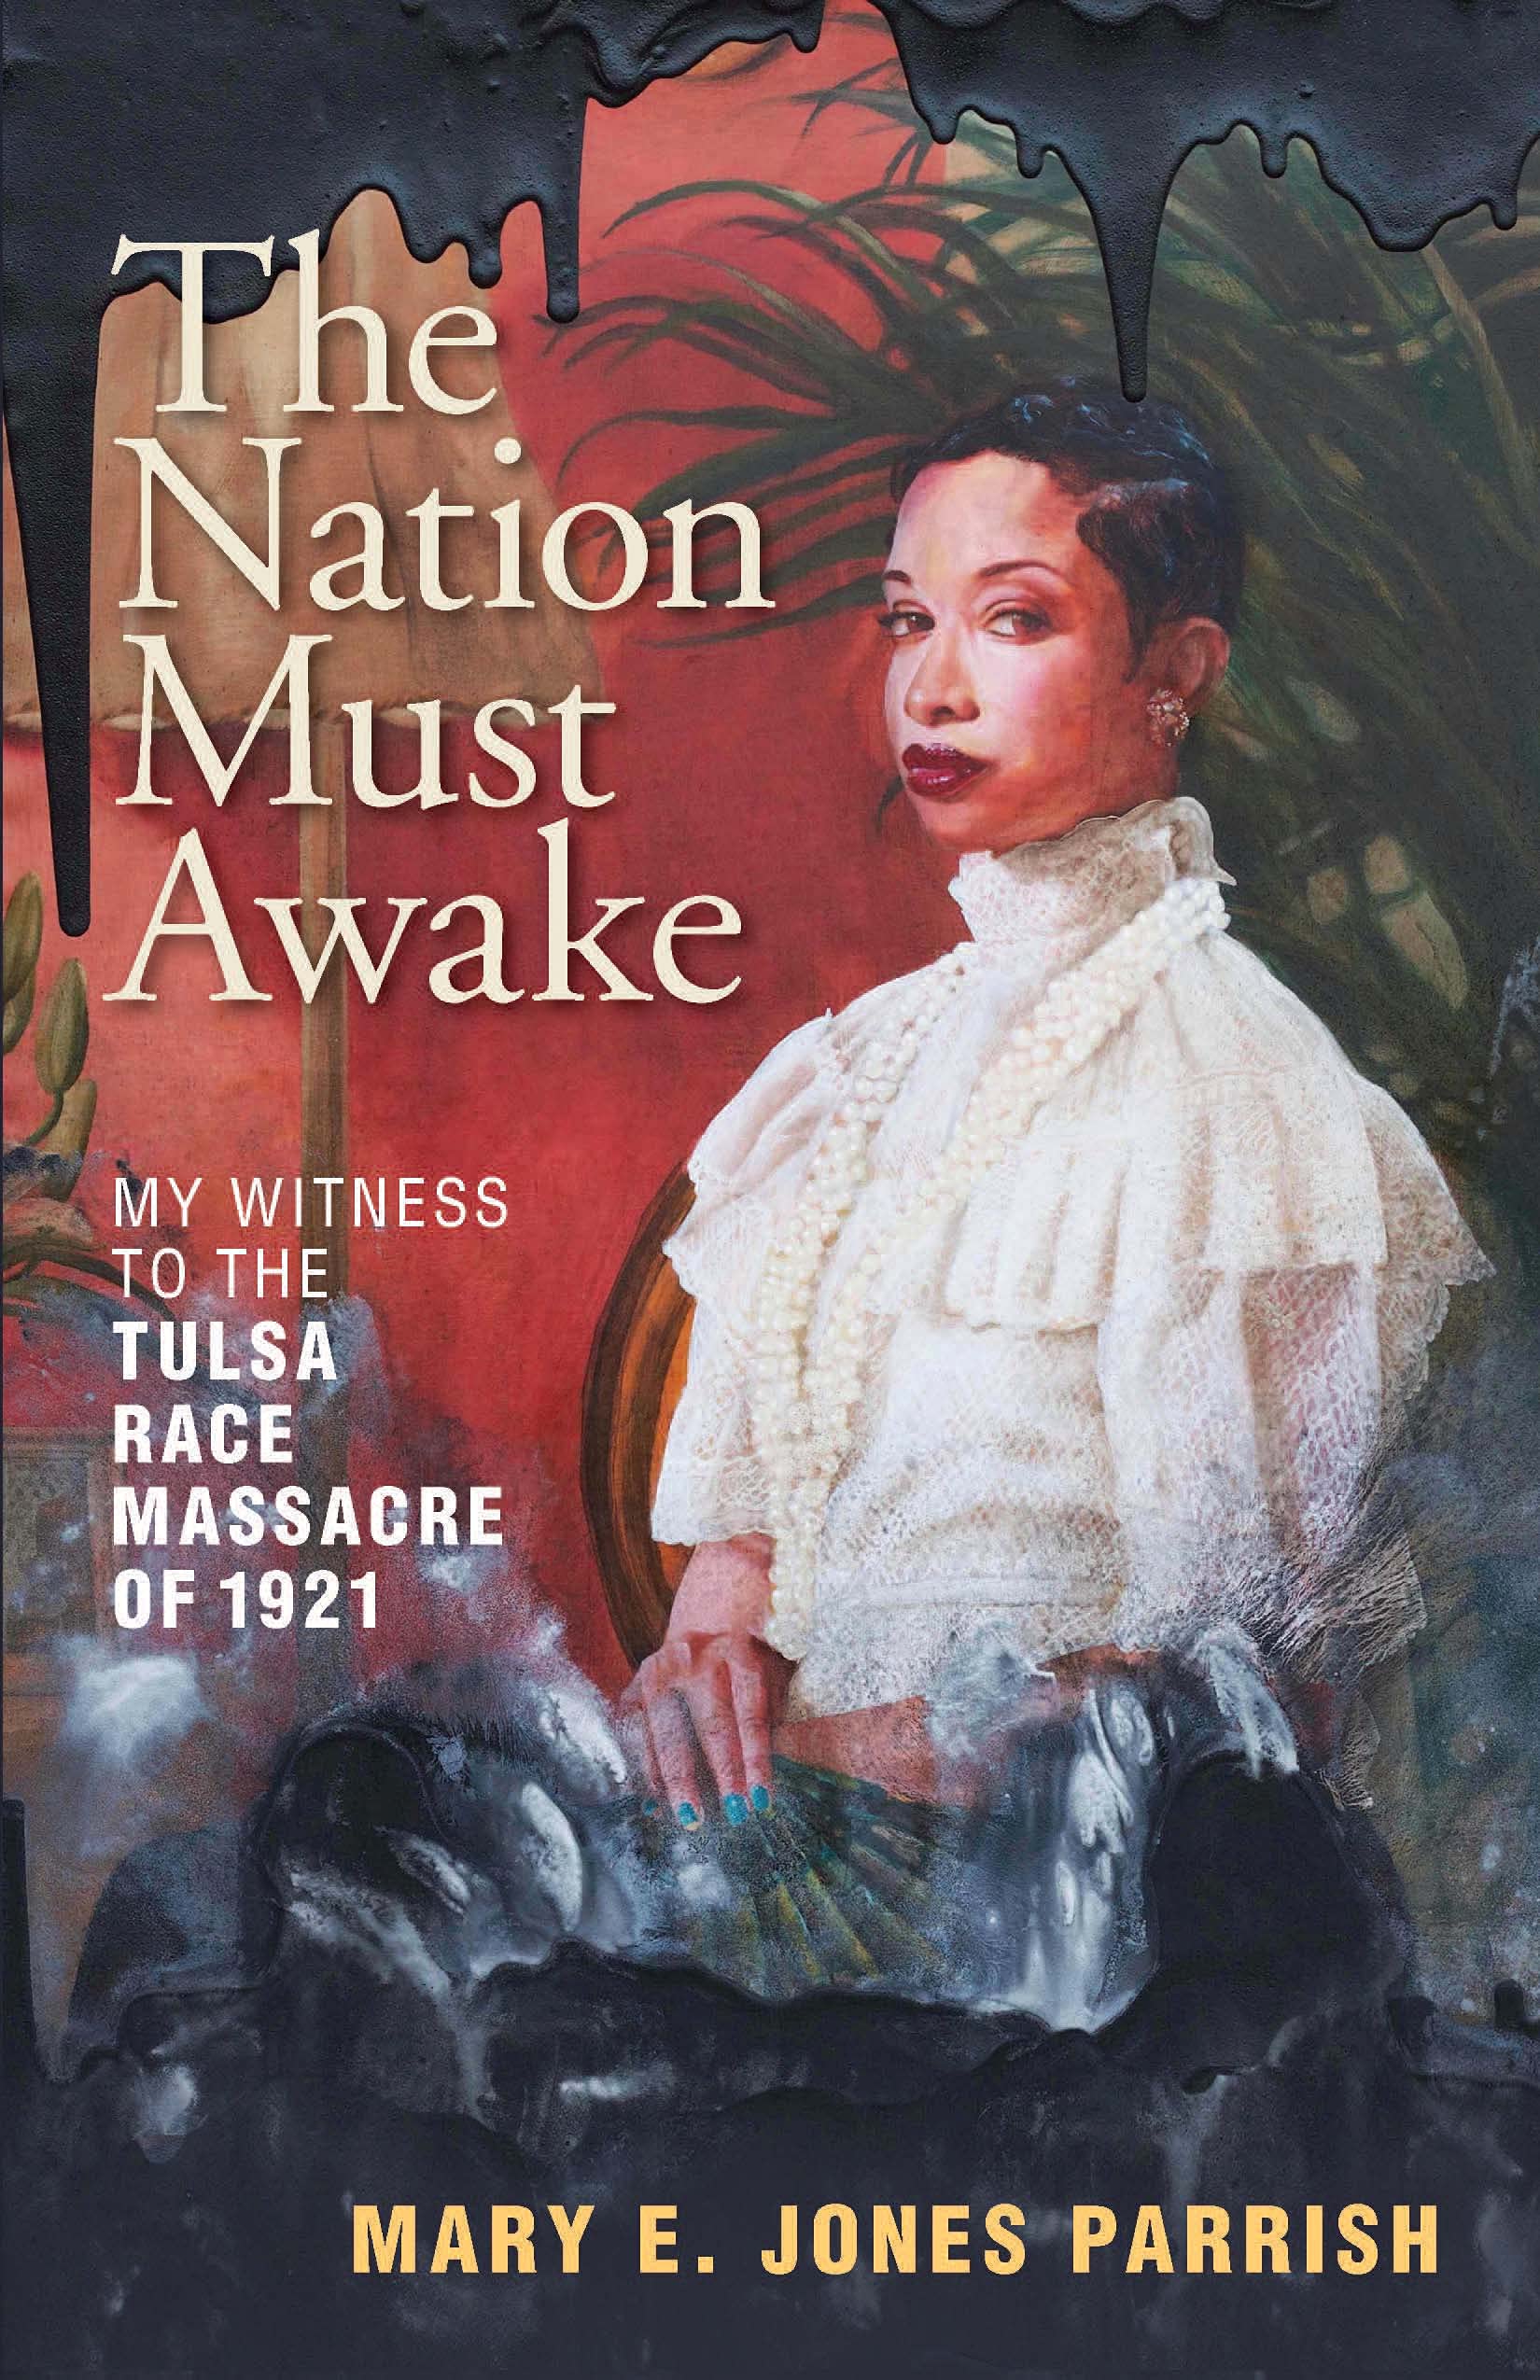 "The Nation Must Awake: My Witness to the Tulsa Race Massacre of 1921" shares the late African American teacher and journalist Mary E. John Parrish